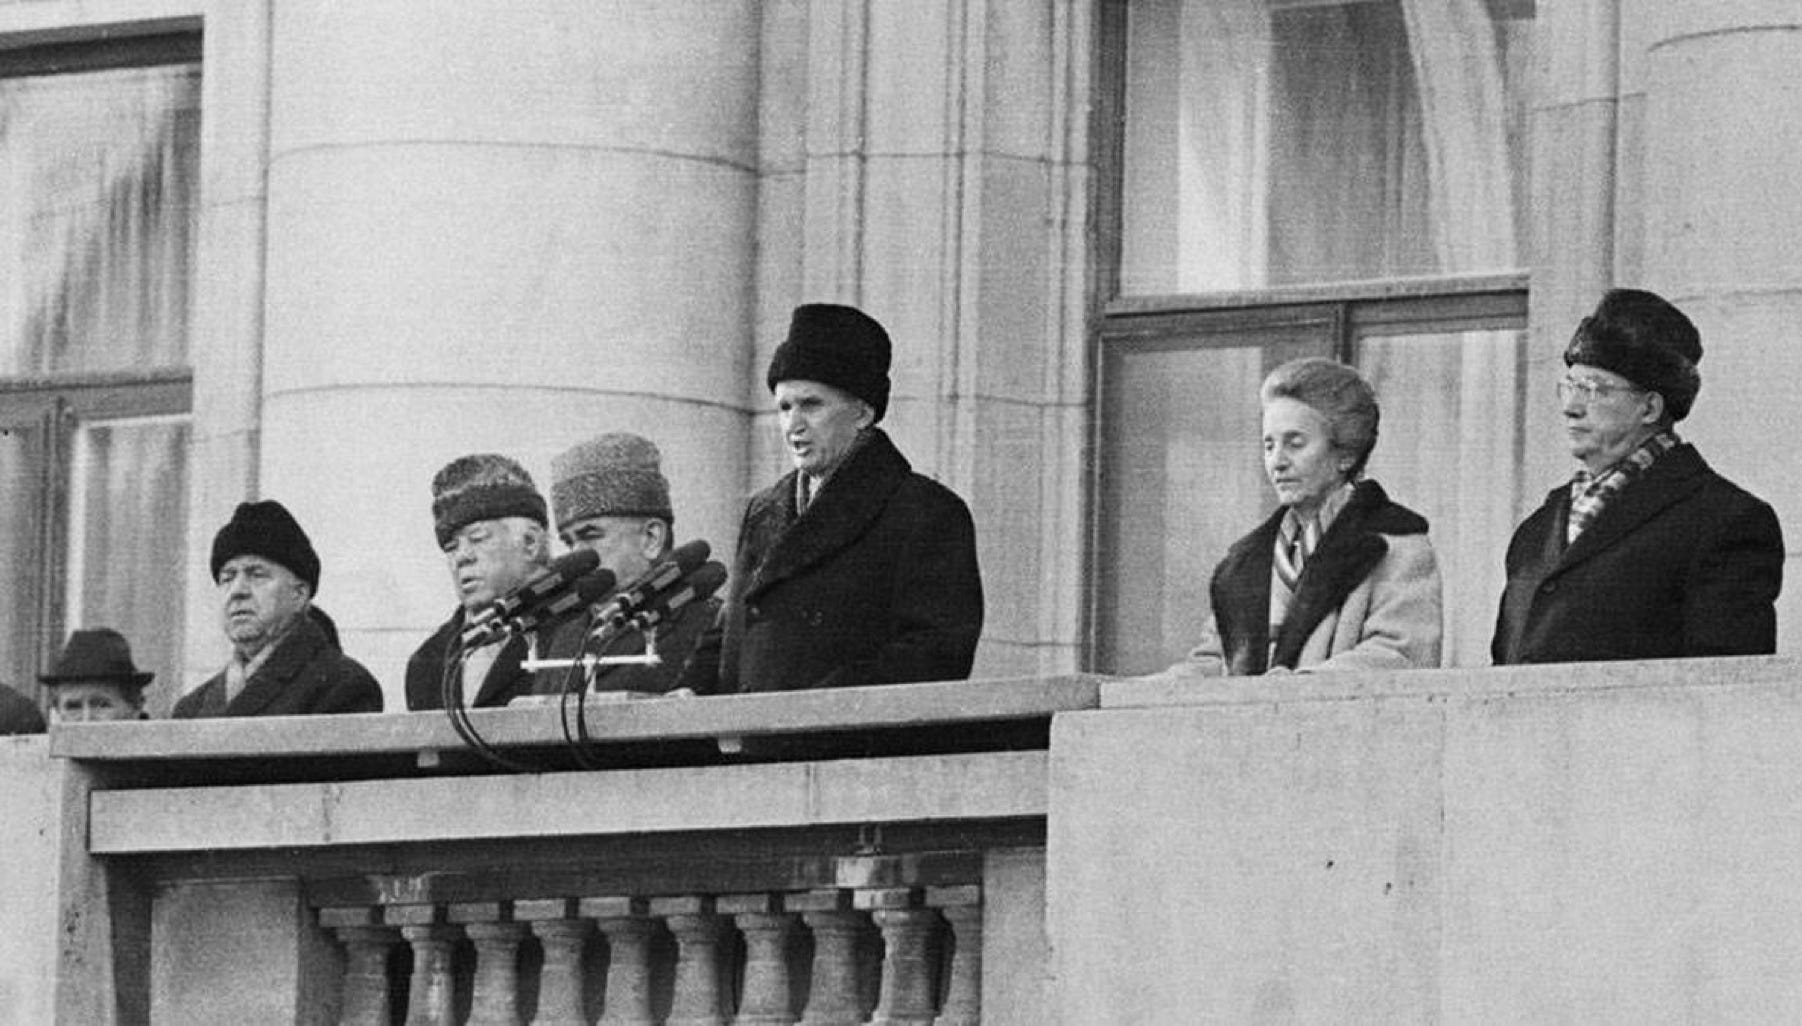 Nicolae Ceaușescu, centre, with his wife Elena, delivering his final address to the masses on 21st December 1989 from the balcony of the Communist Party’s Central Committee building in central Bucharest.